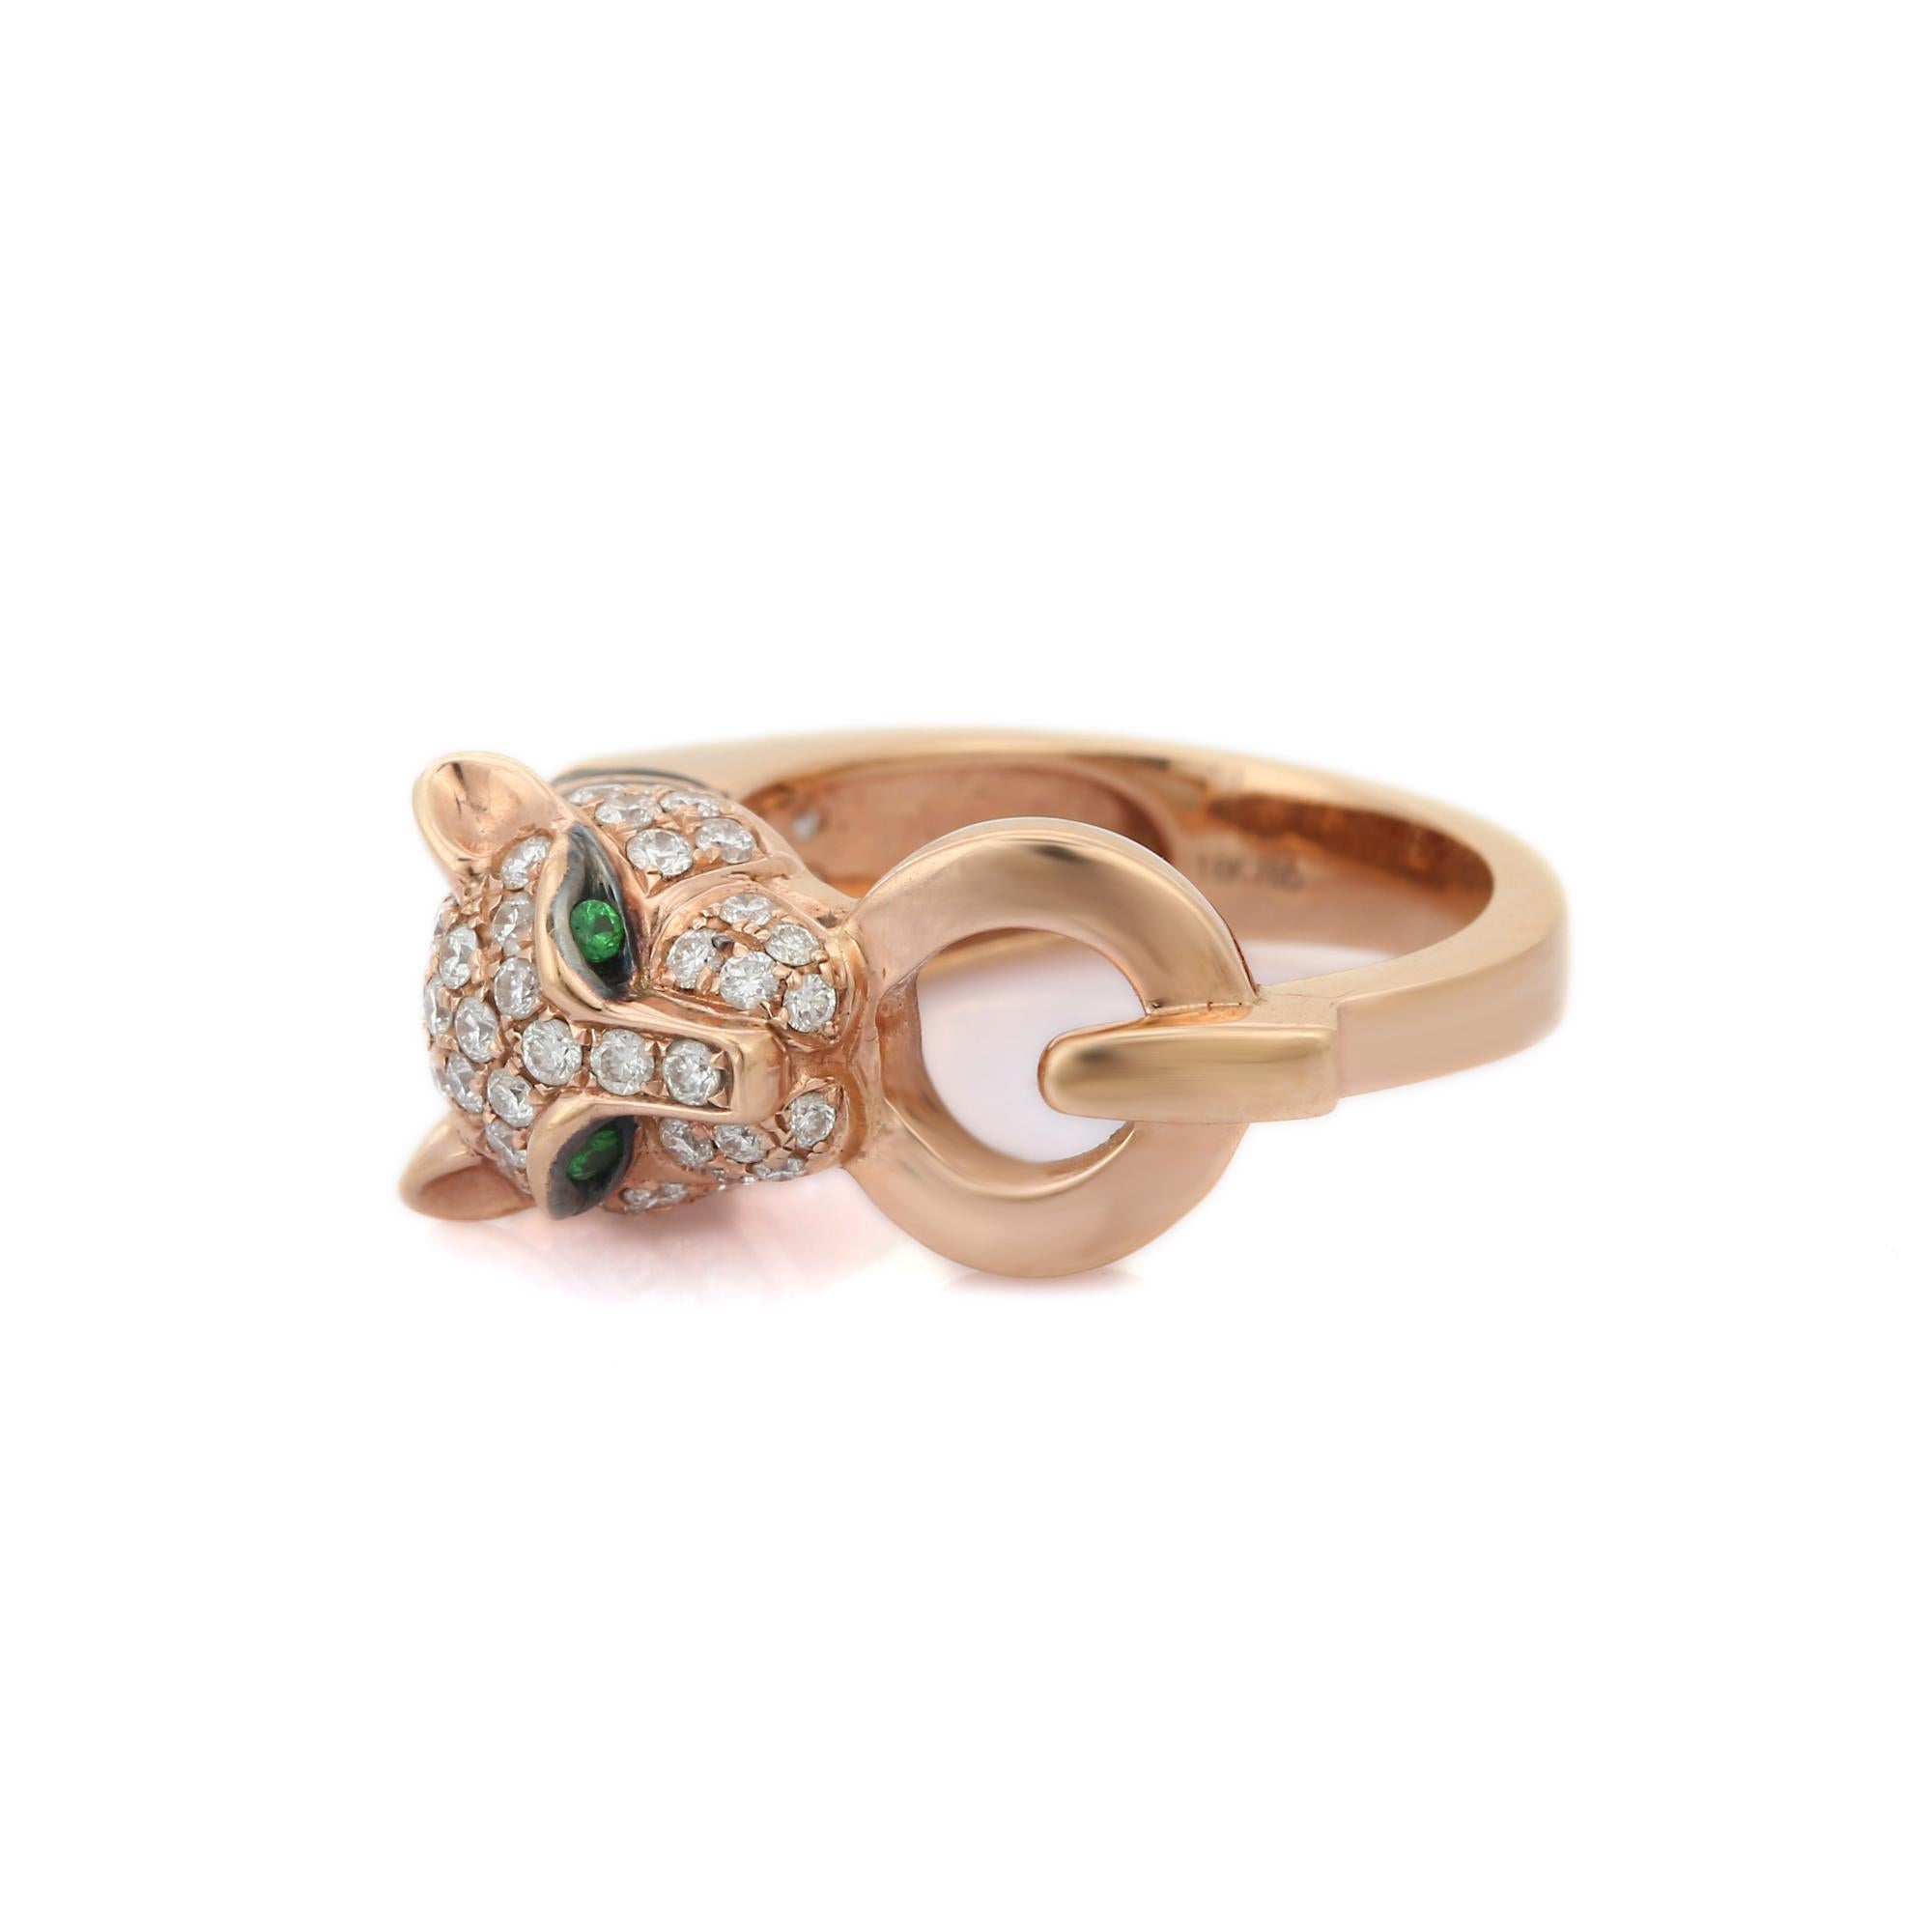 For Sale:  18K Rose Gold Iconic Panther Ring with Tsavorite and Diamond 3